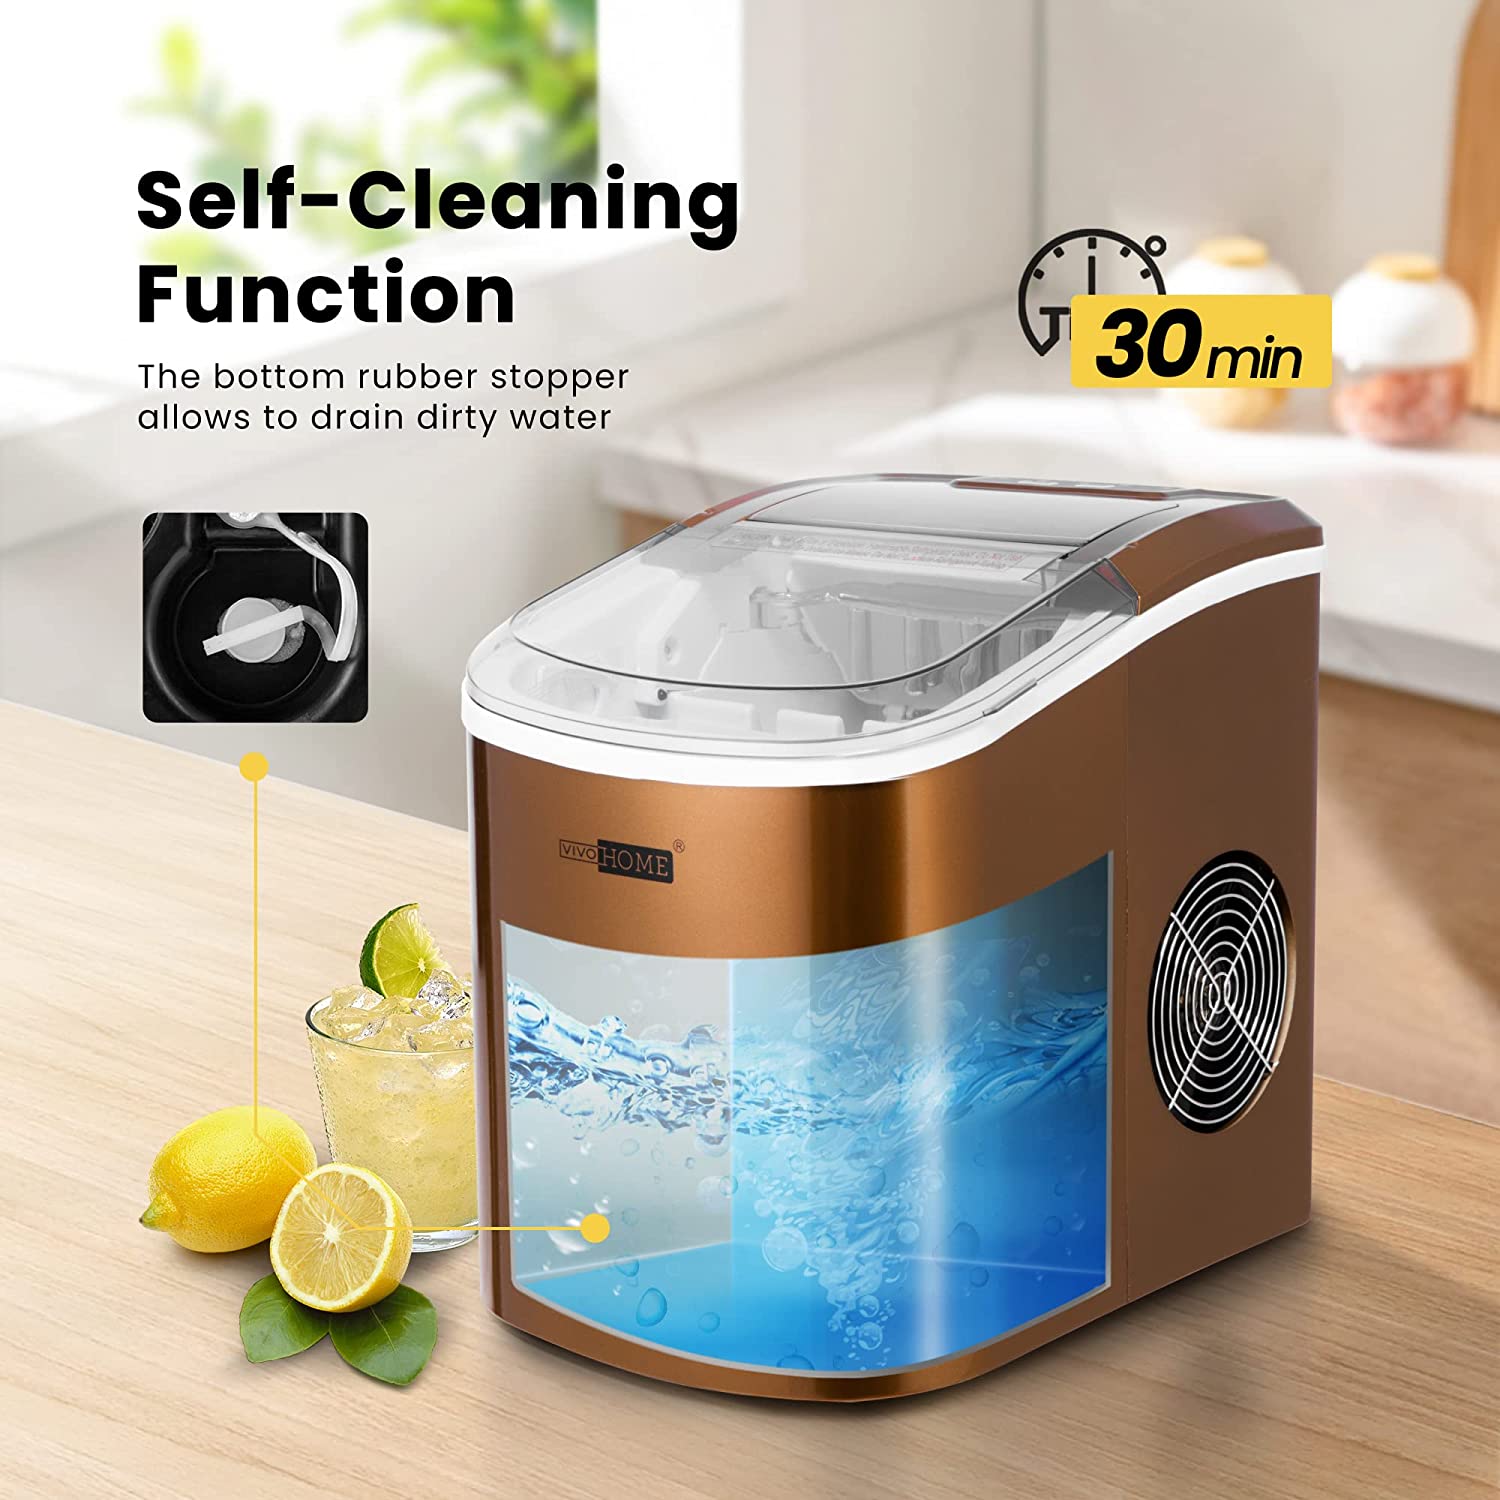 VIVOHOME 27lbs/Day Electric Portable Ice Cube Maker with Hand